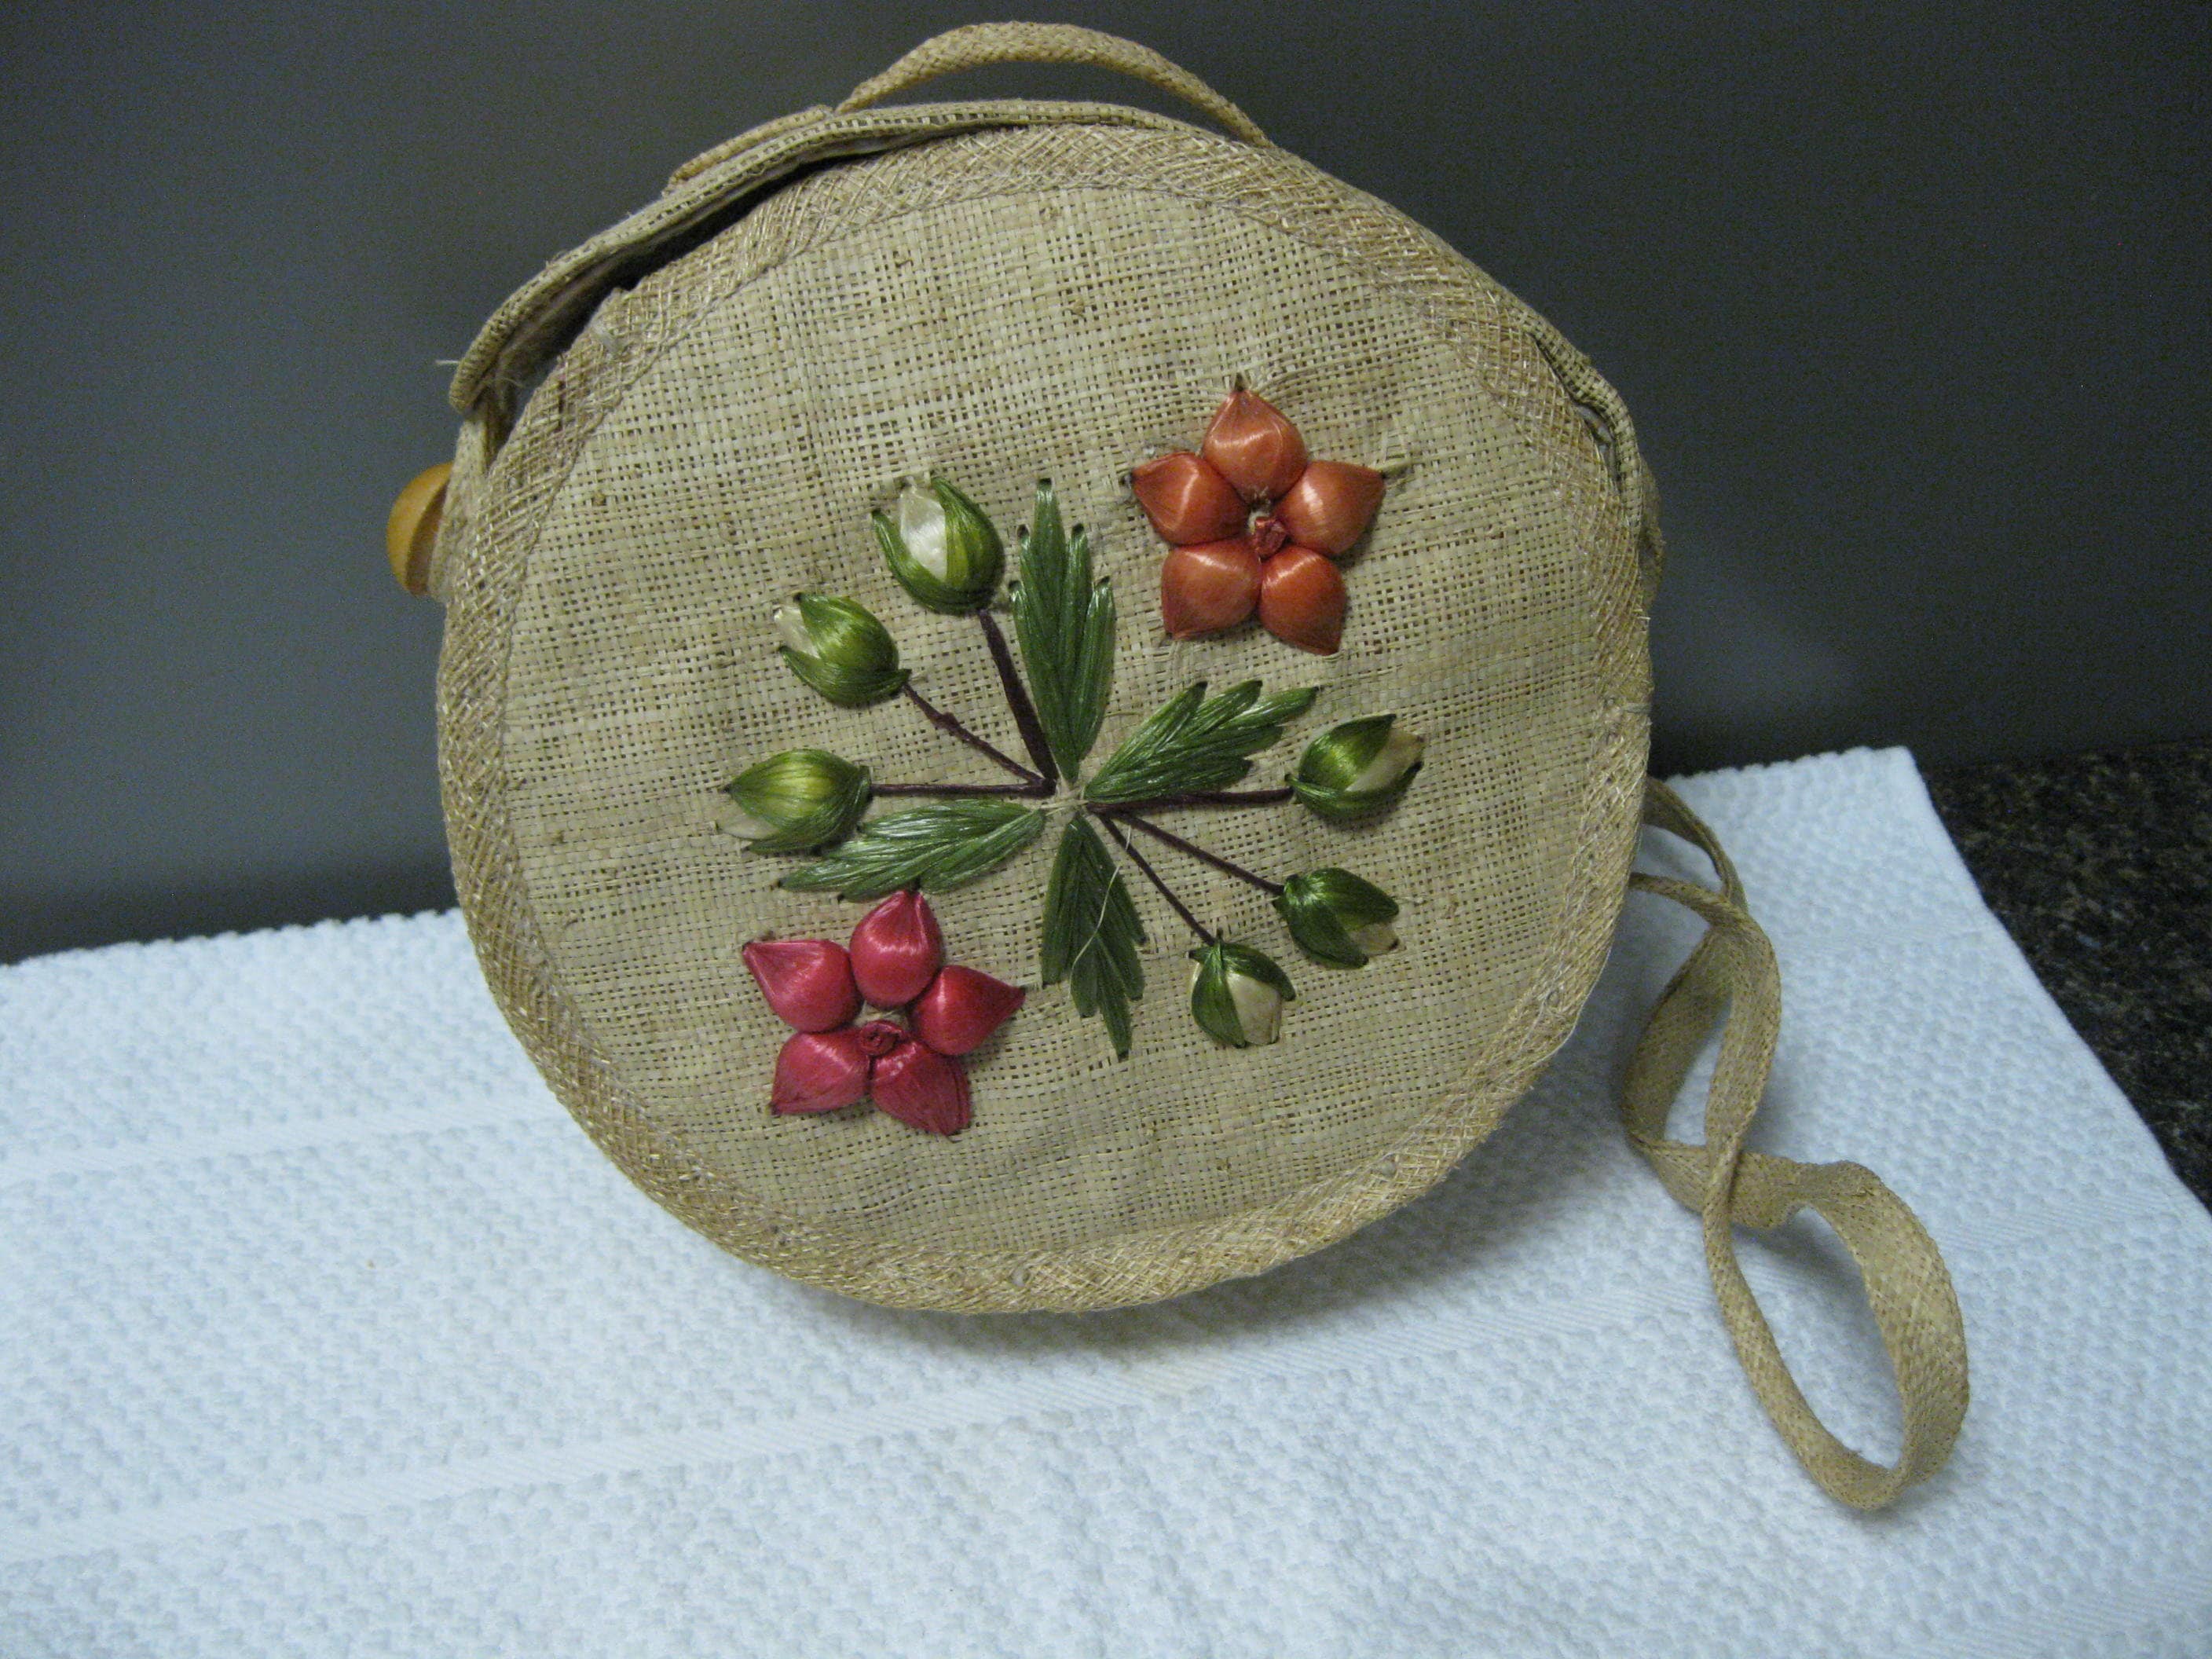 Sold at Auction: Vintage Bags By Whidby, Inc. Adel, GA. Floral